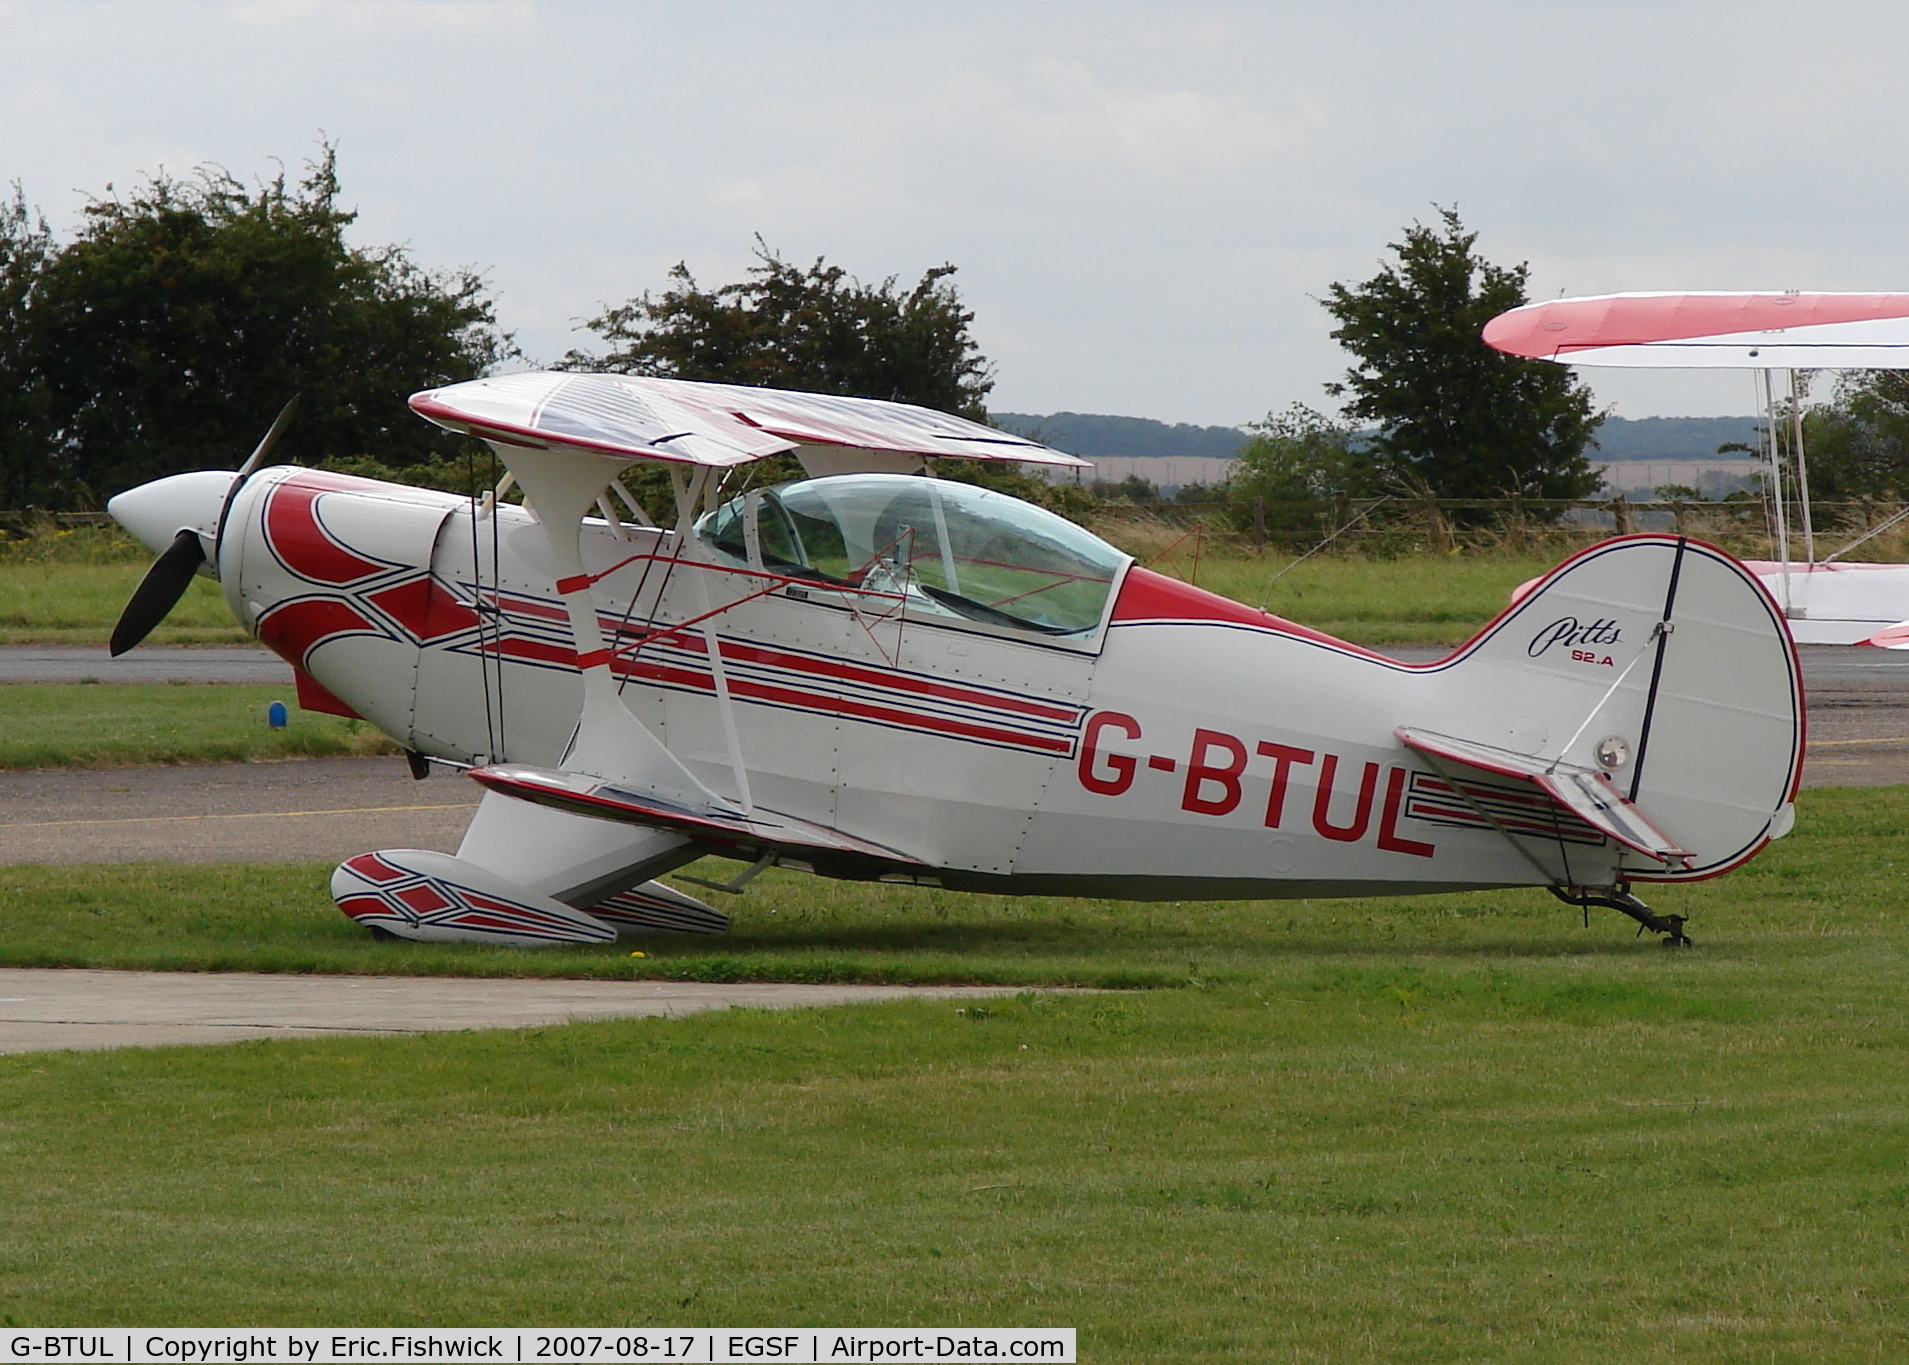 G-BTUL, 1979 Aerotek Pitts S-2A Special C/N 2200, 1. G-BTUL at Conington Aerobatics Competition